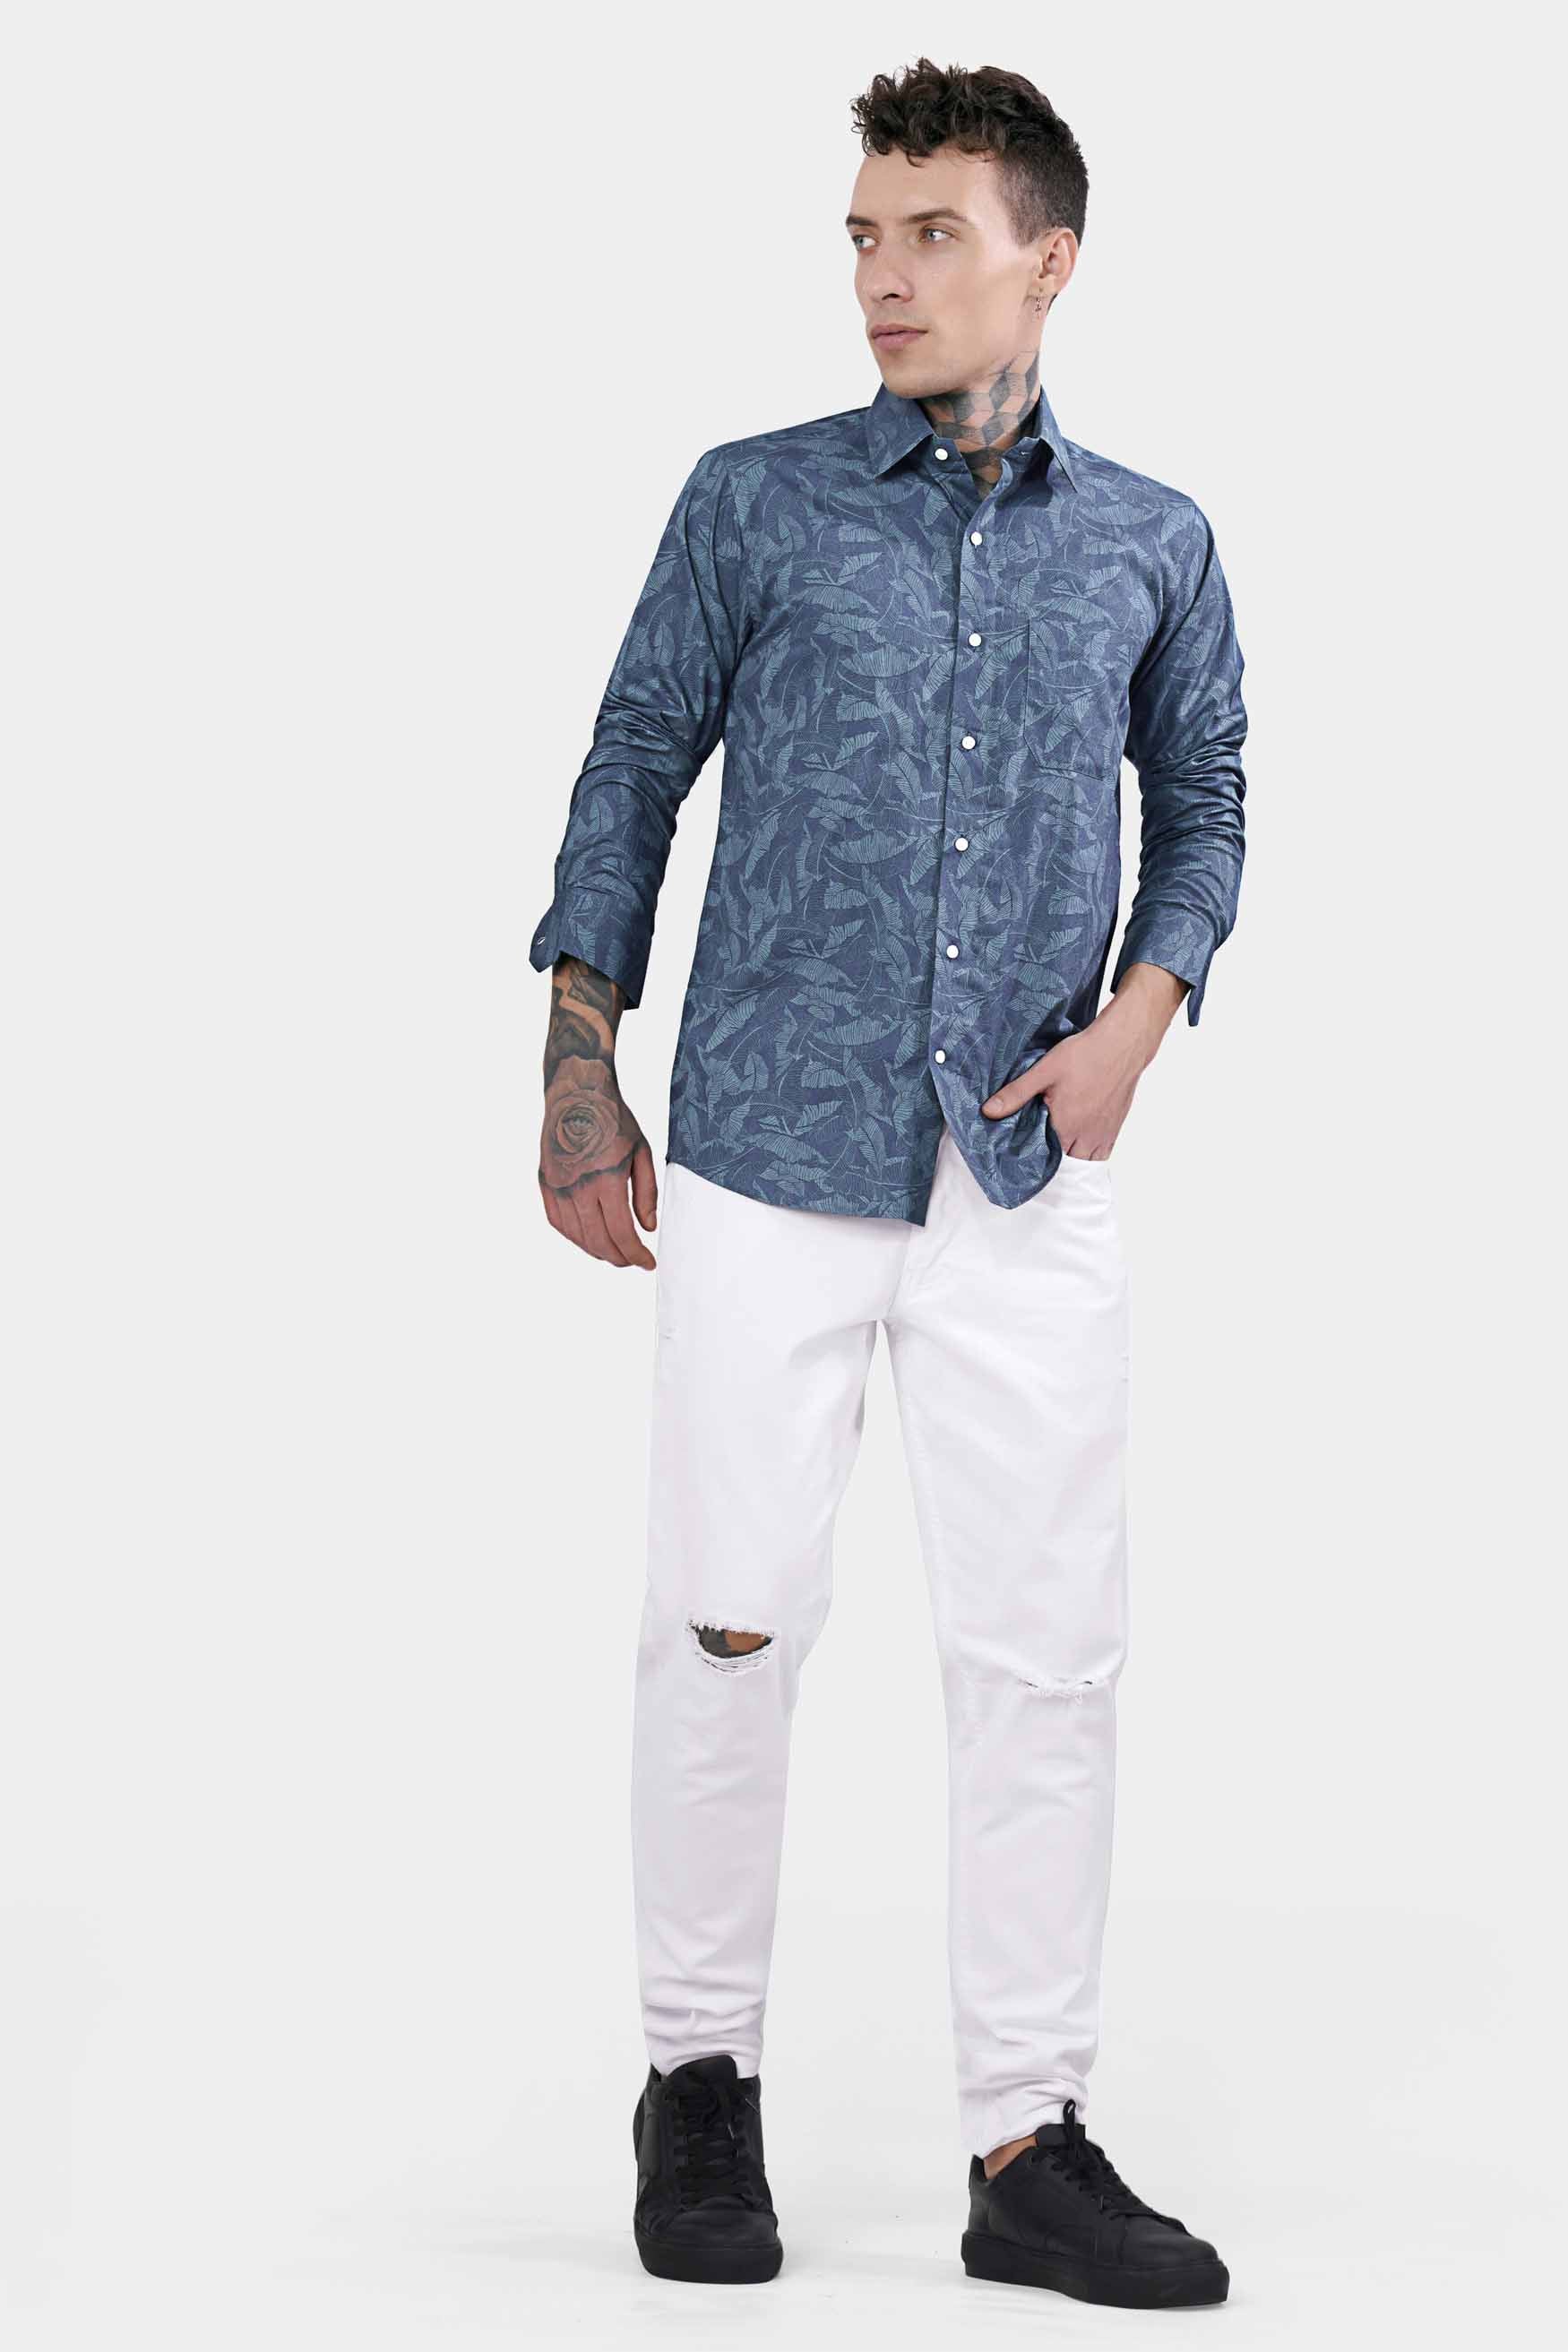 Slate Blue and Heather Gray Leaves Printed Premium Cotton Shirt